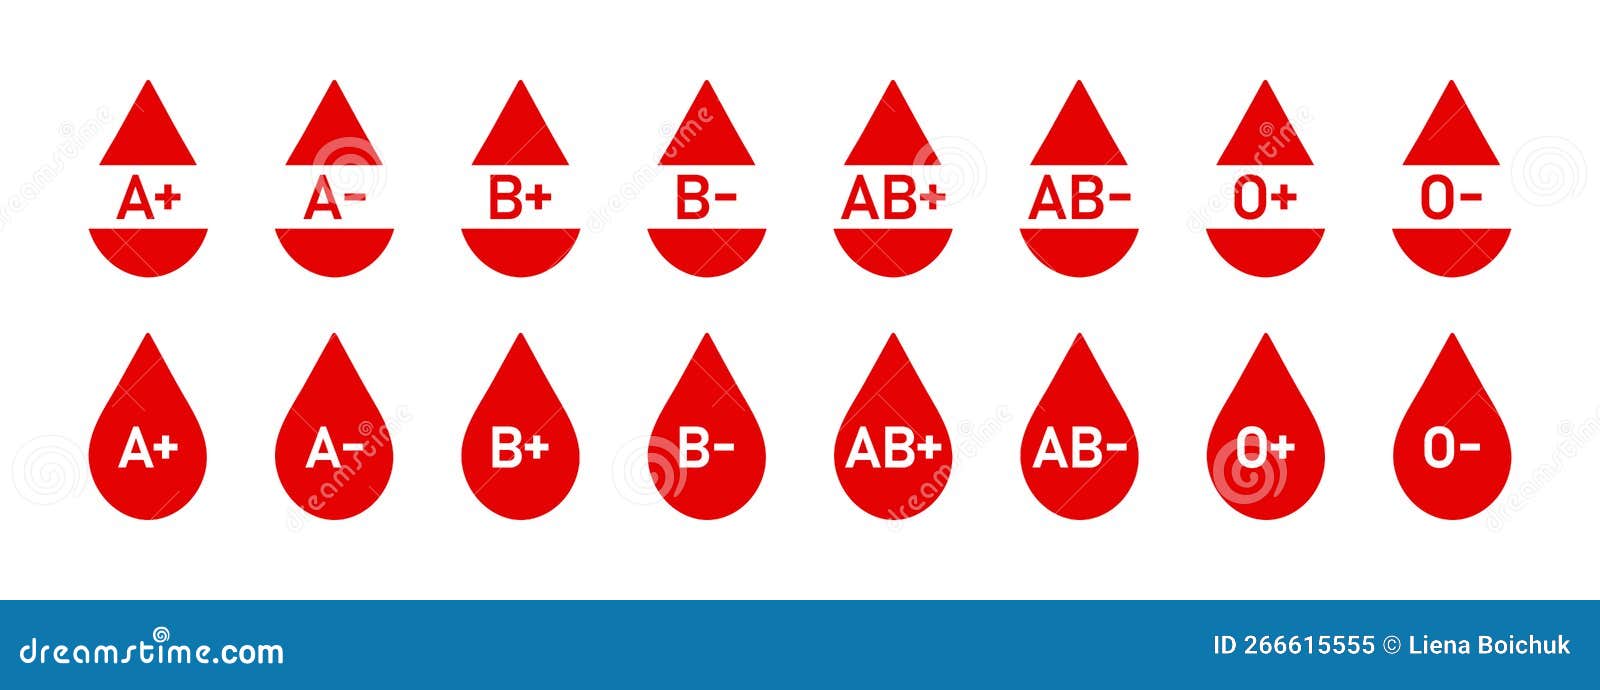 Steve Raizen on LinkedIn: Anyone with a Rh-positive blood type can receive  O-positive red blood…